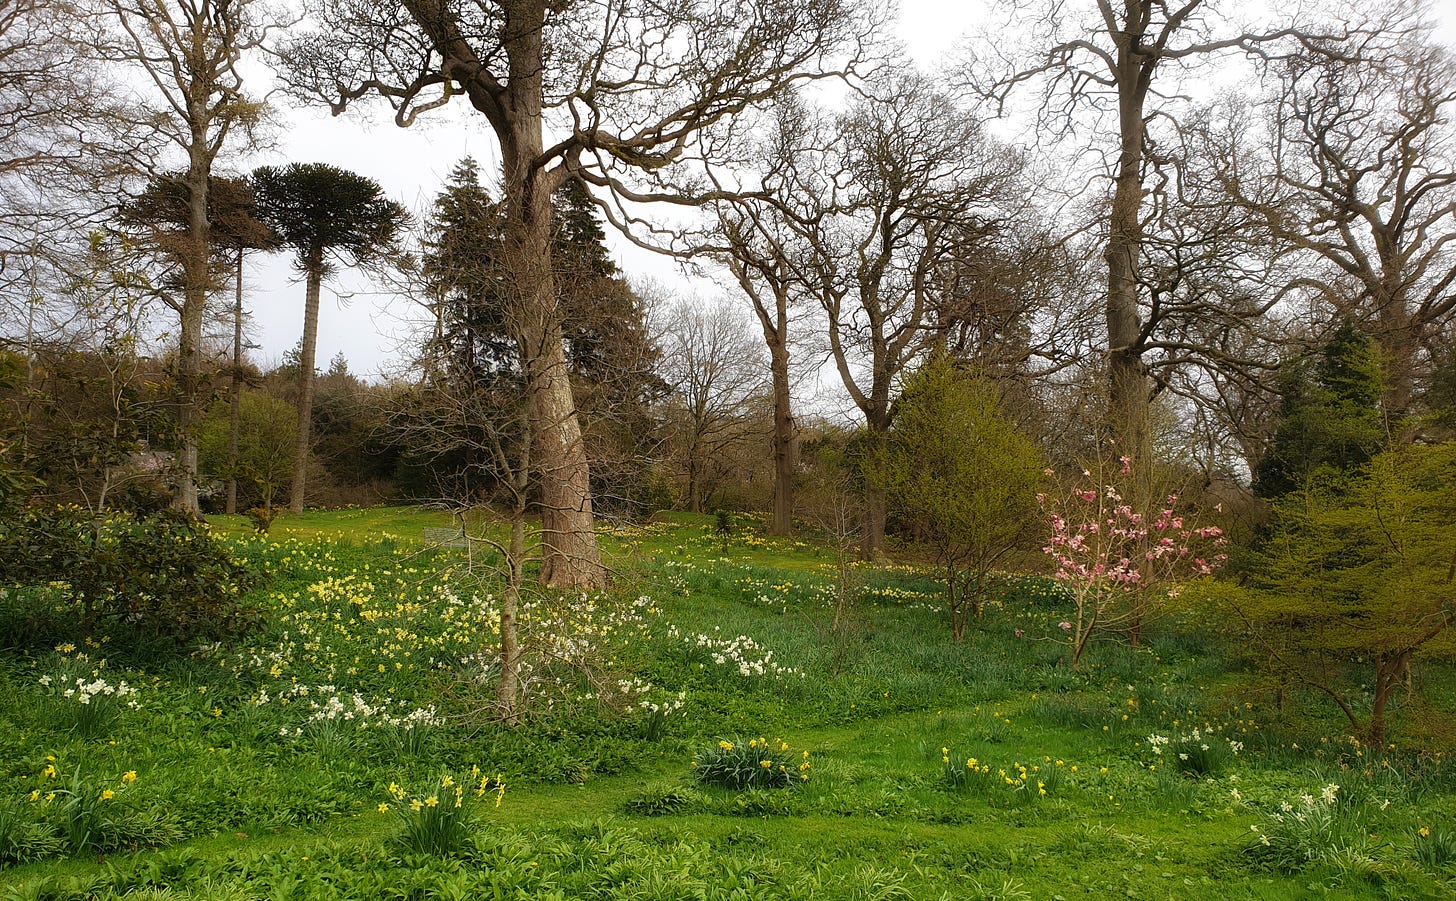 Trees in early spring in parkland of Holker Hall in Cumbria. Green grass and daffodils and a small magnolia tree.